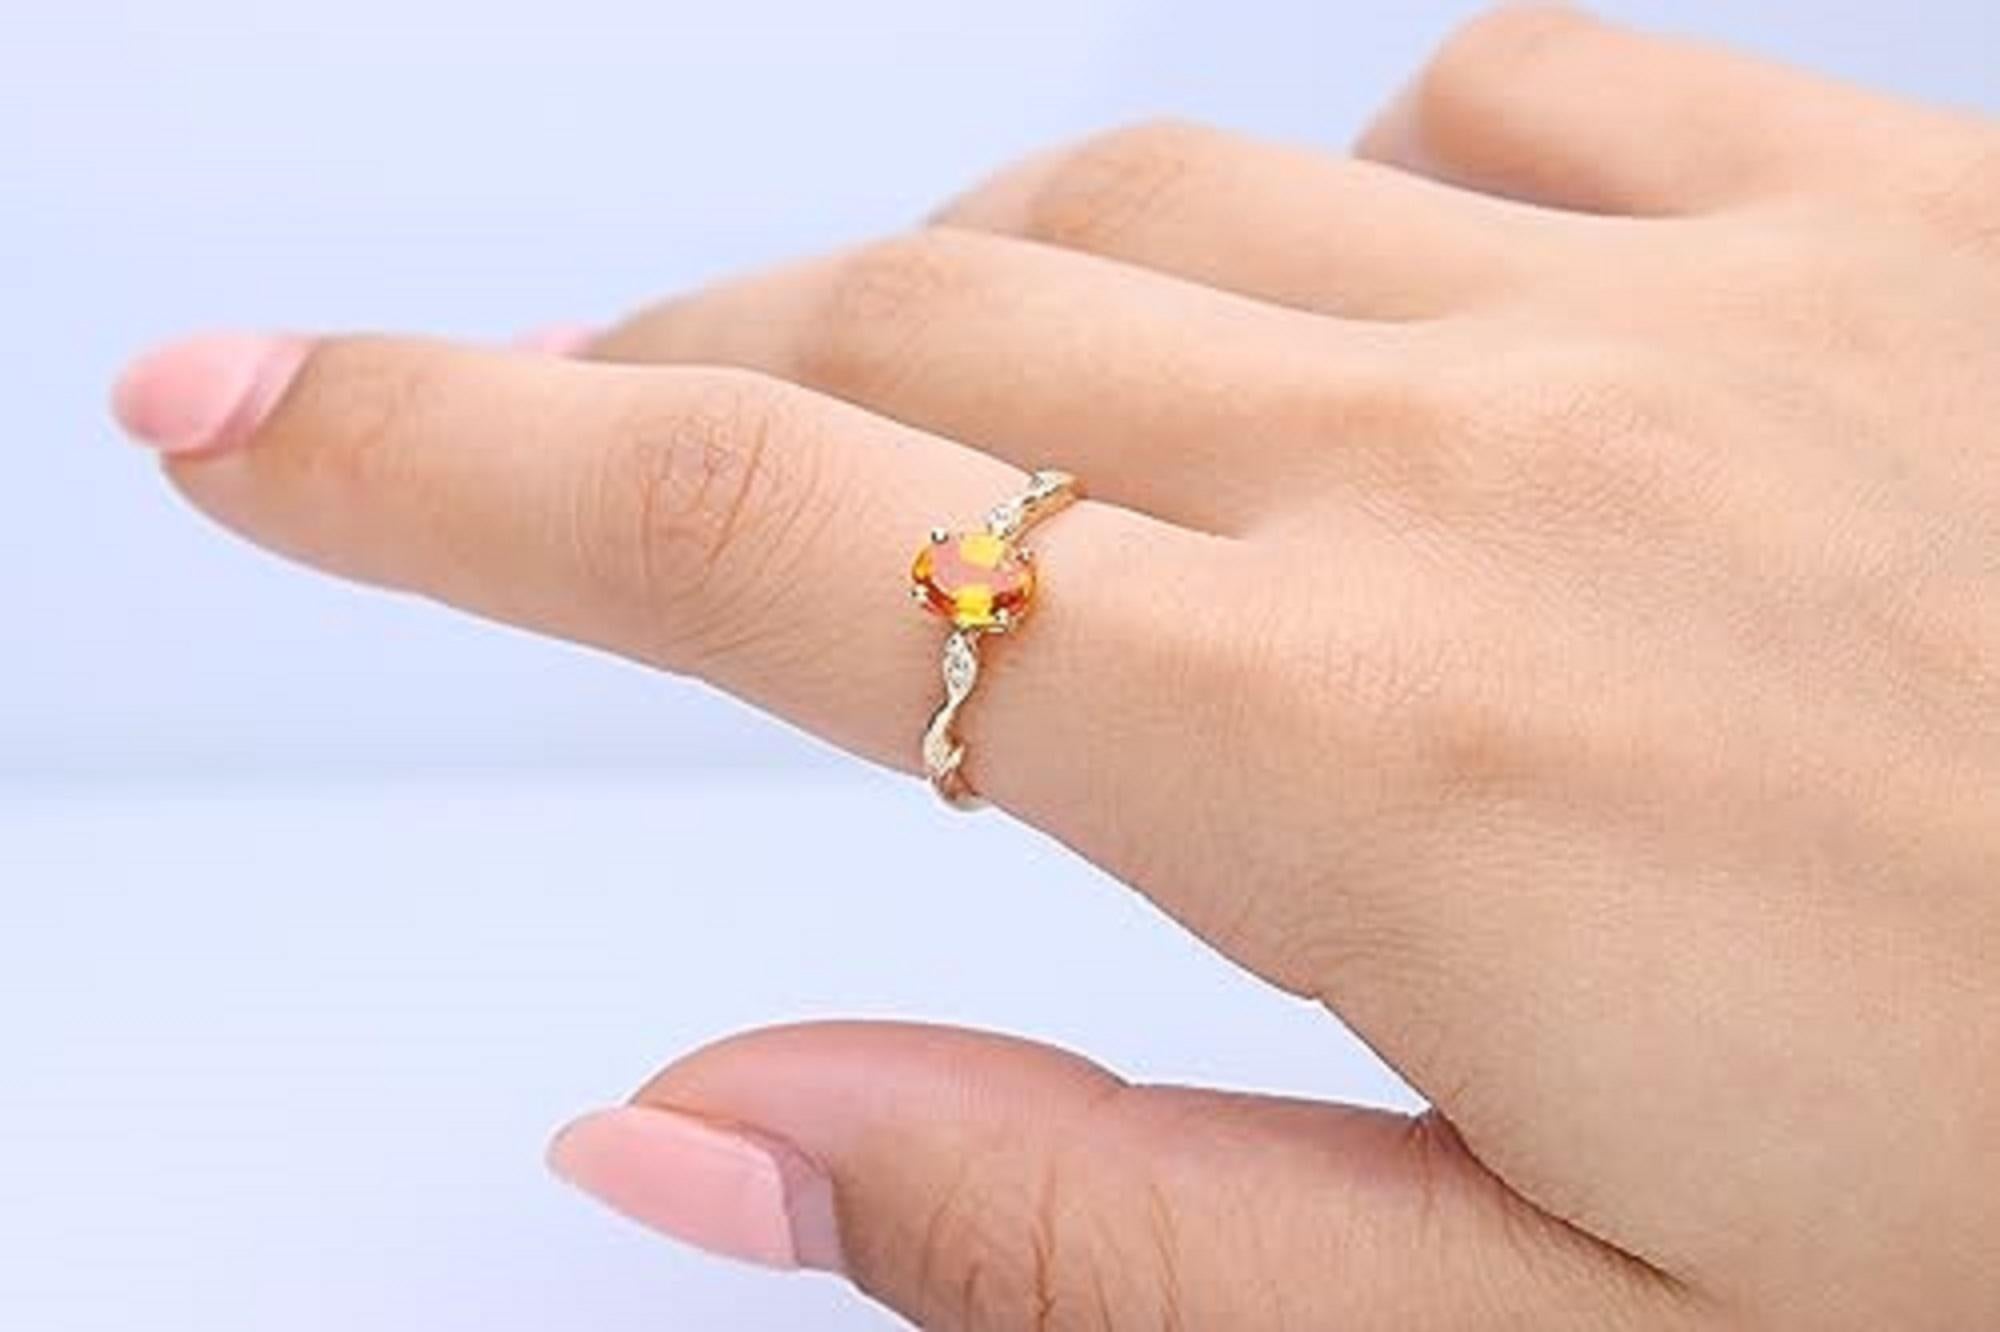 Decorate yourself in elegance with this Ring is crafted from 14-karat Yellow gold 5*7 Oval-cut Spessartite (1 pcs) 1.16 carat and round-cut white diamond (4 pcs) 0.03 carat. This Ring is weight 1.78 grams. This delicate Ring is polished to a high